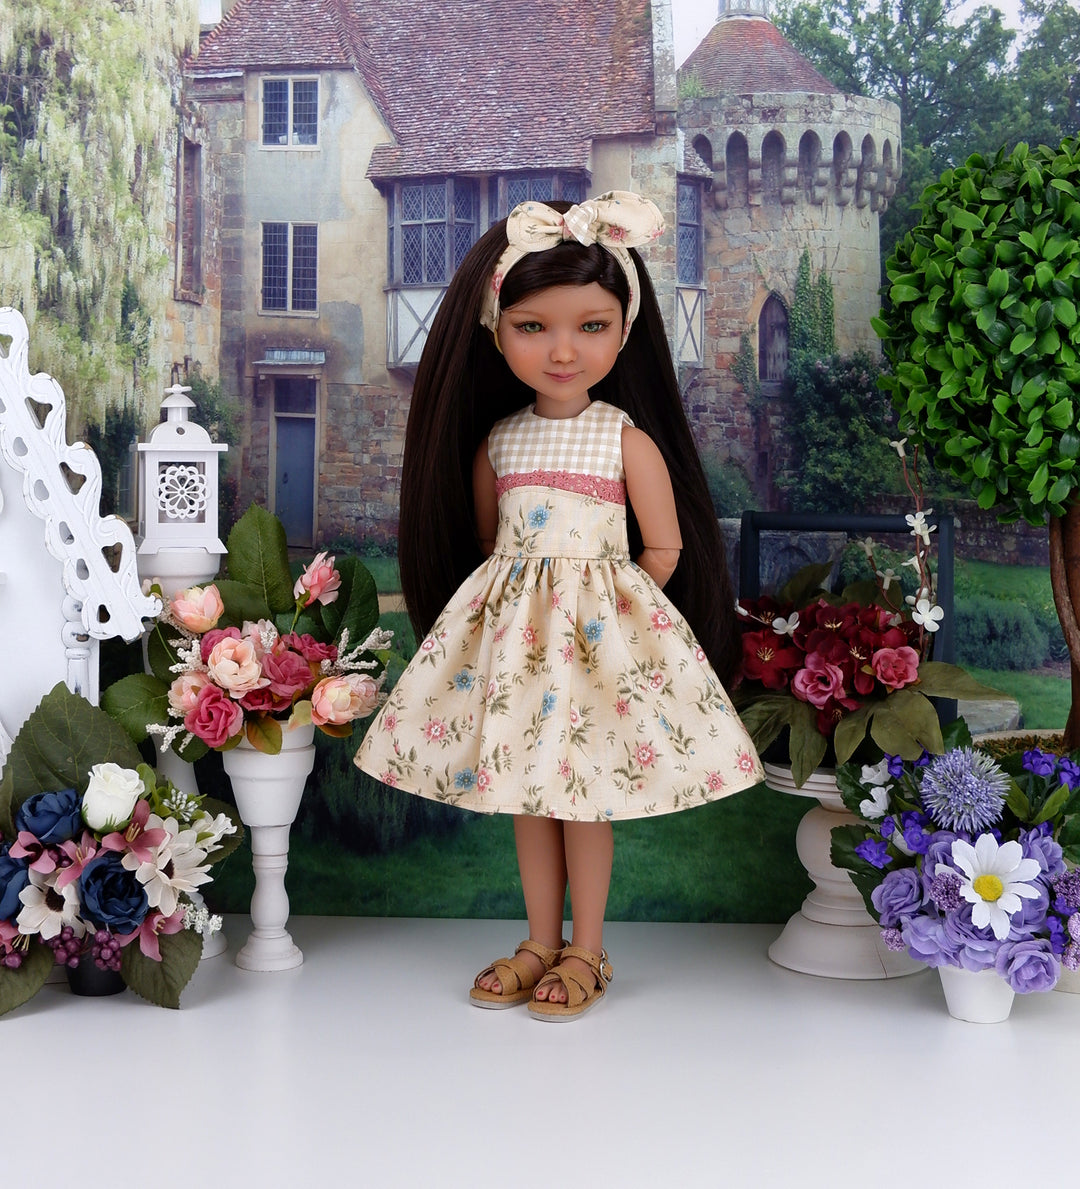 Prairie Wildflowers - dress and sandals for Ruby Red Fashion Friends doll